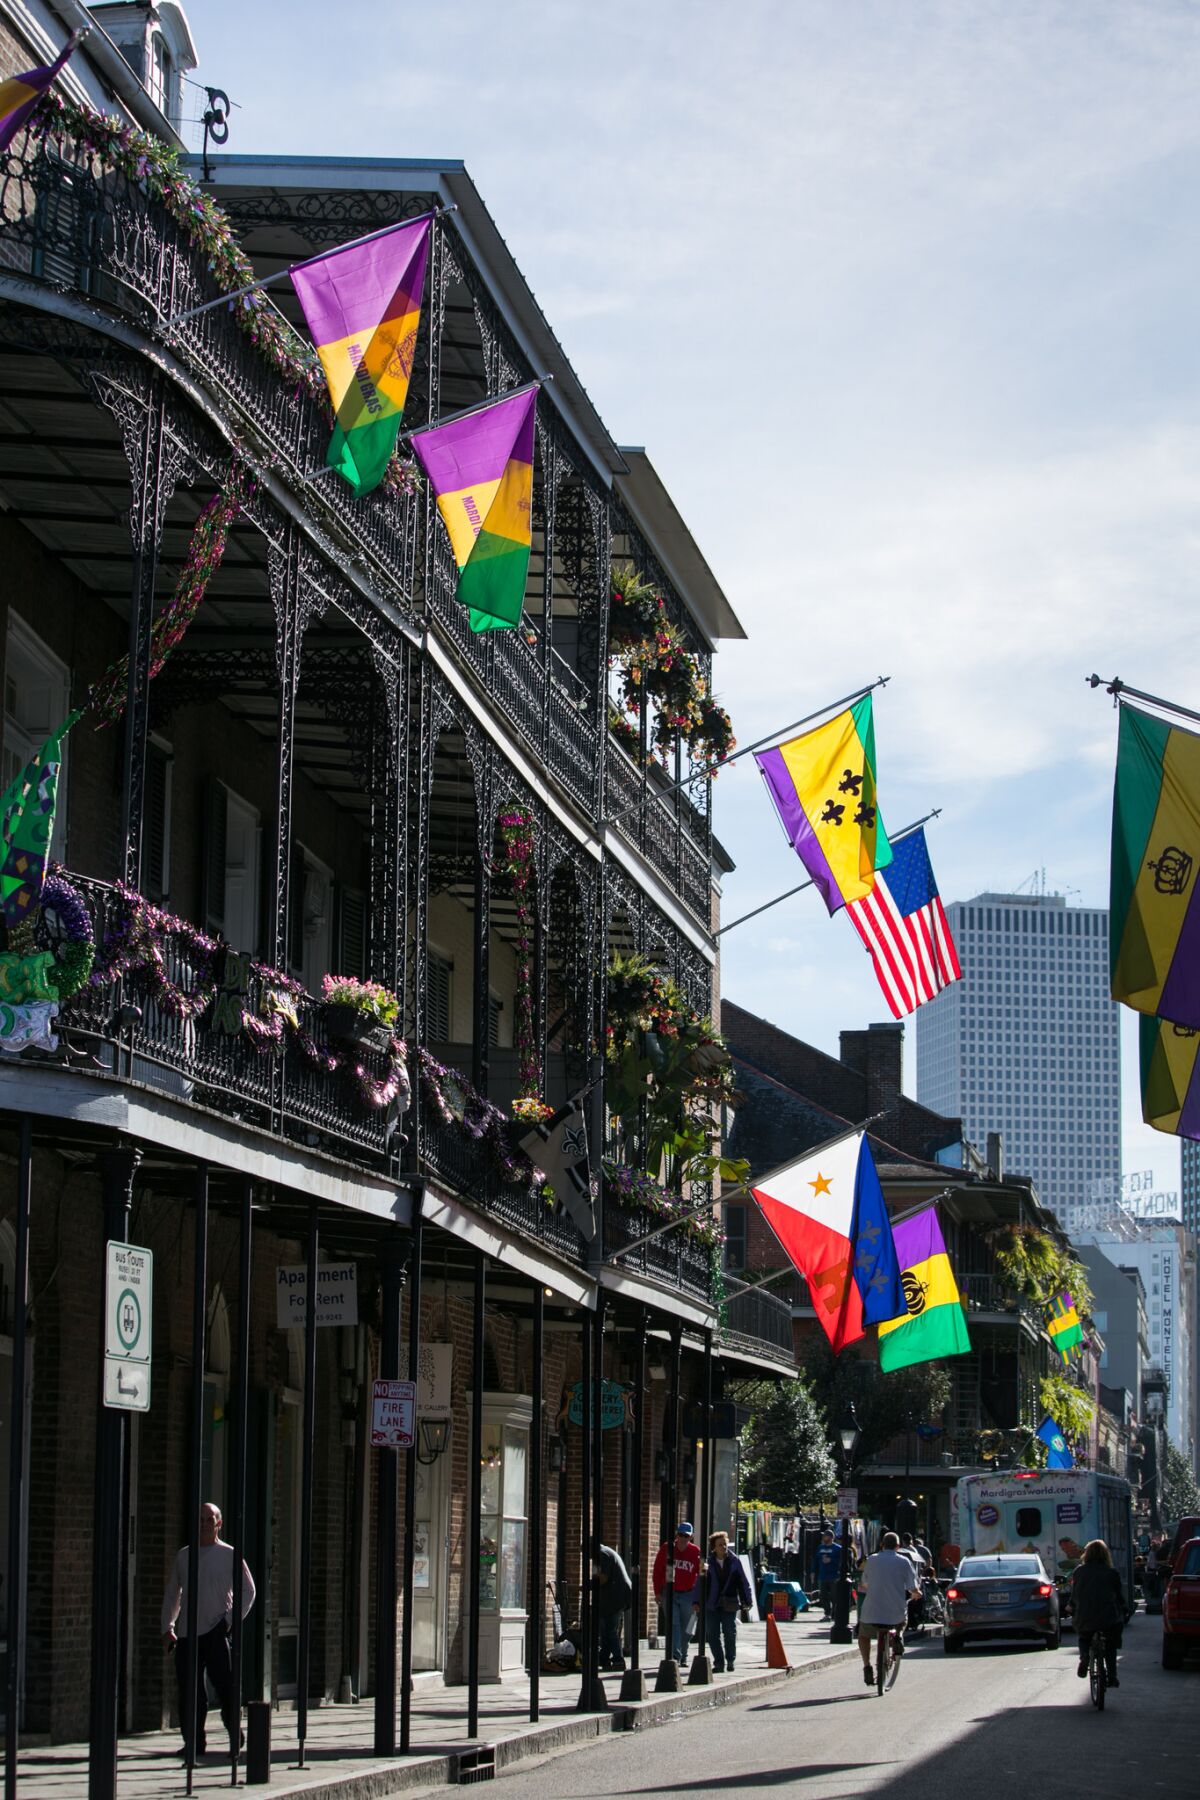 The historic French Quarter of New Orleans in 2017.